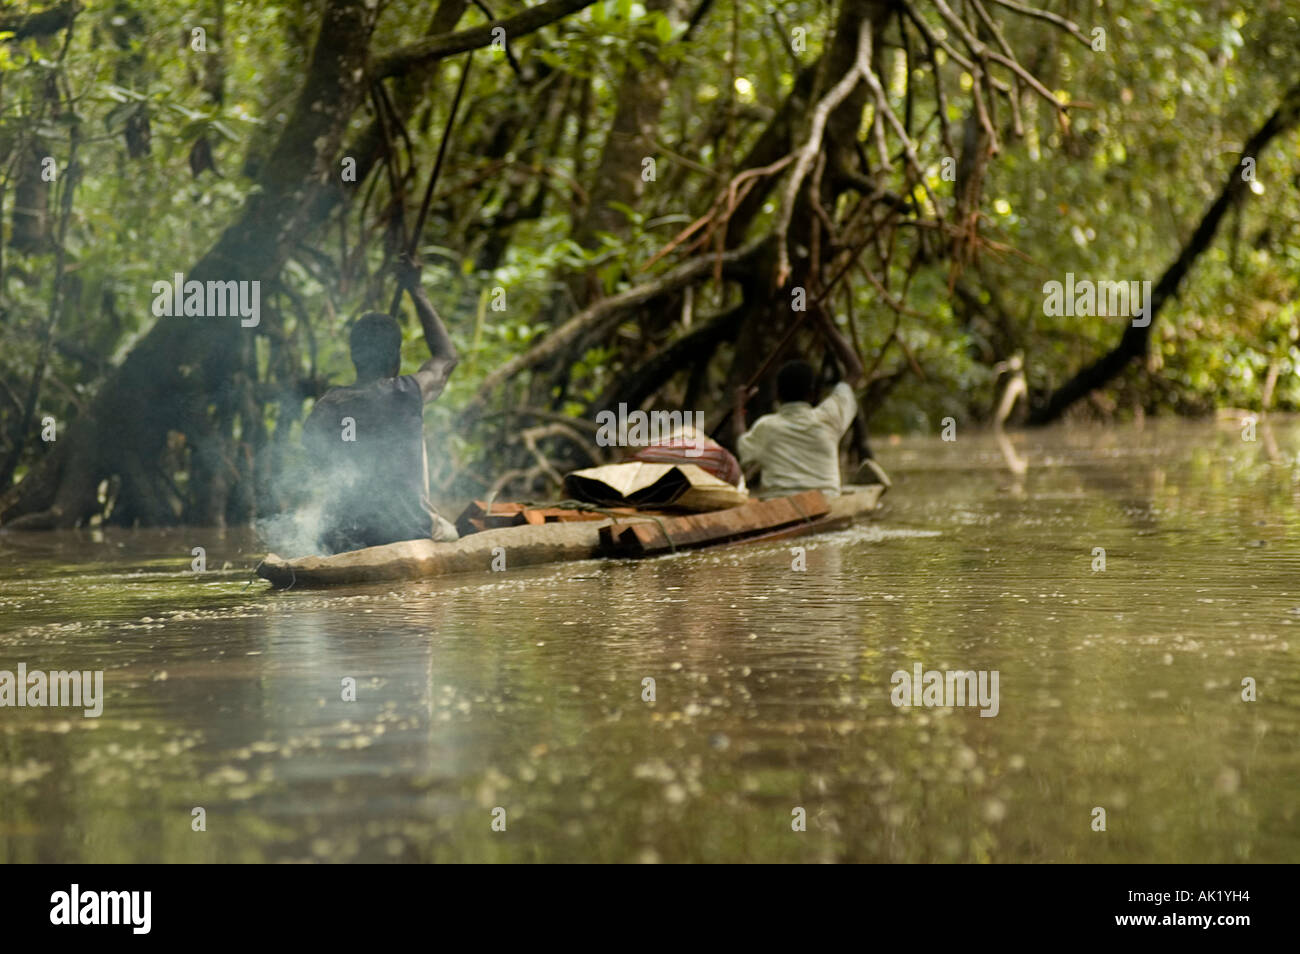 Asmat people travelling in their dugout canoe in dense mangrove forests of Irian Jaya, Indonesia. Stock Photo